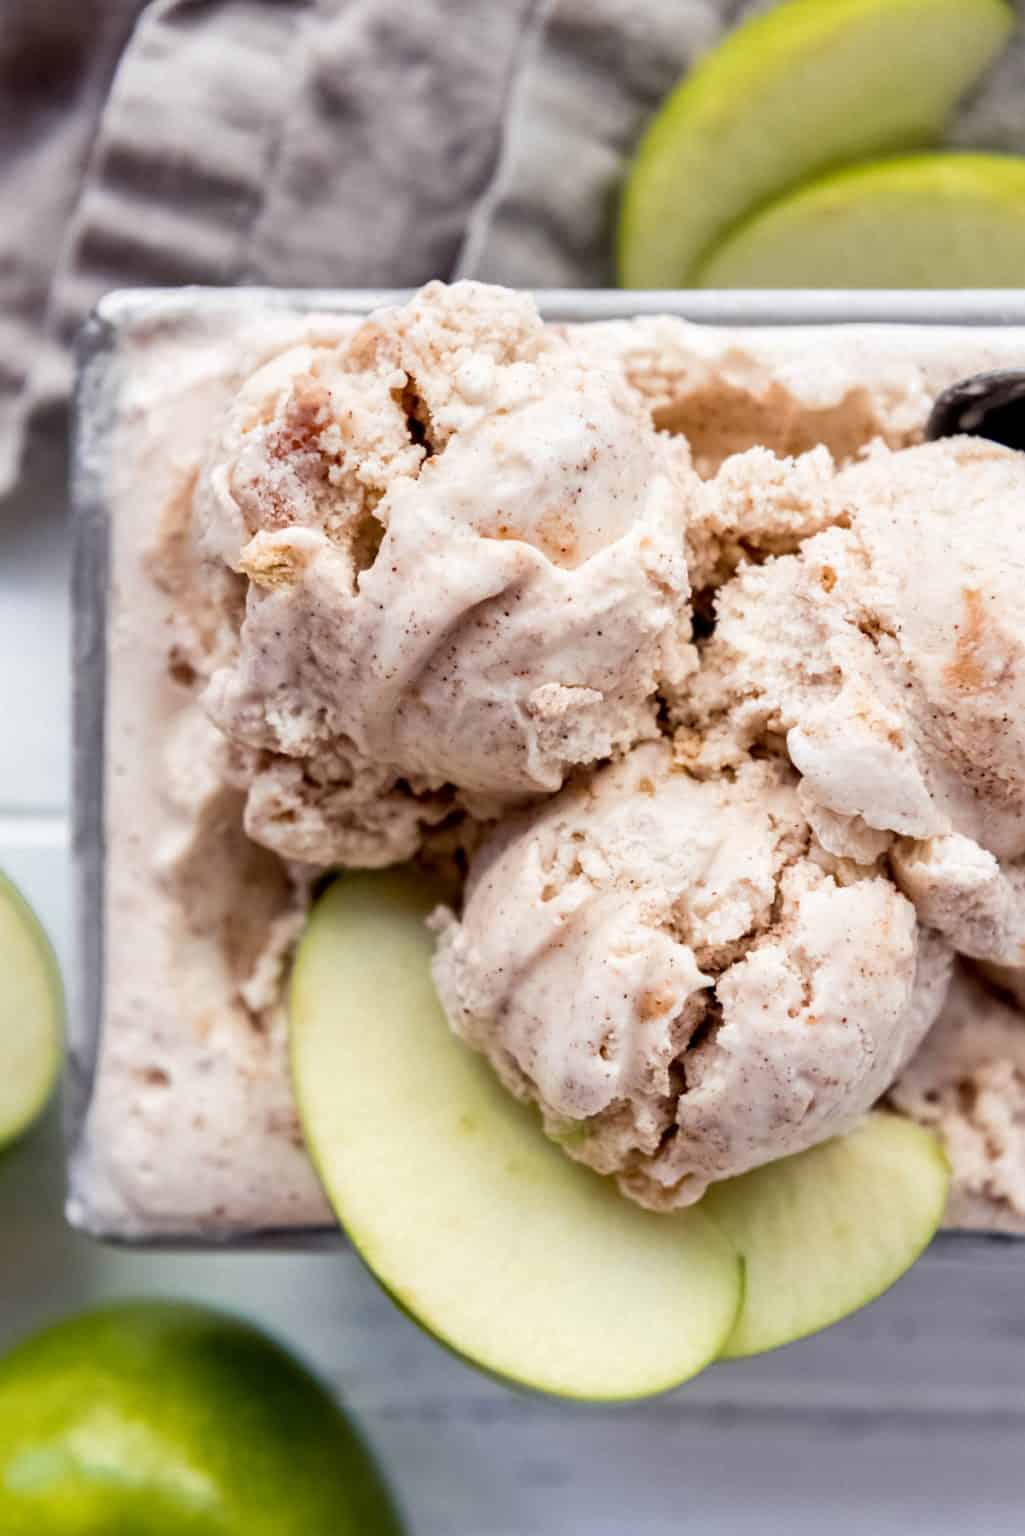 An overhead photo of scoops of cinnamon ice cream in a metal container with slices of green apples next to it. 